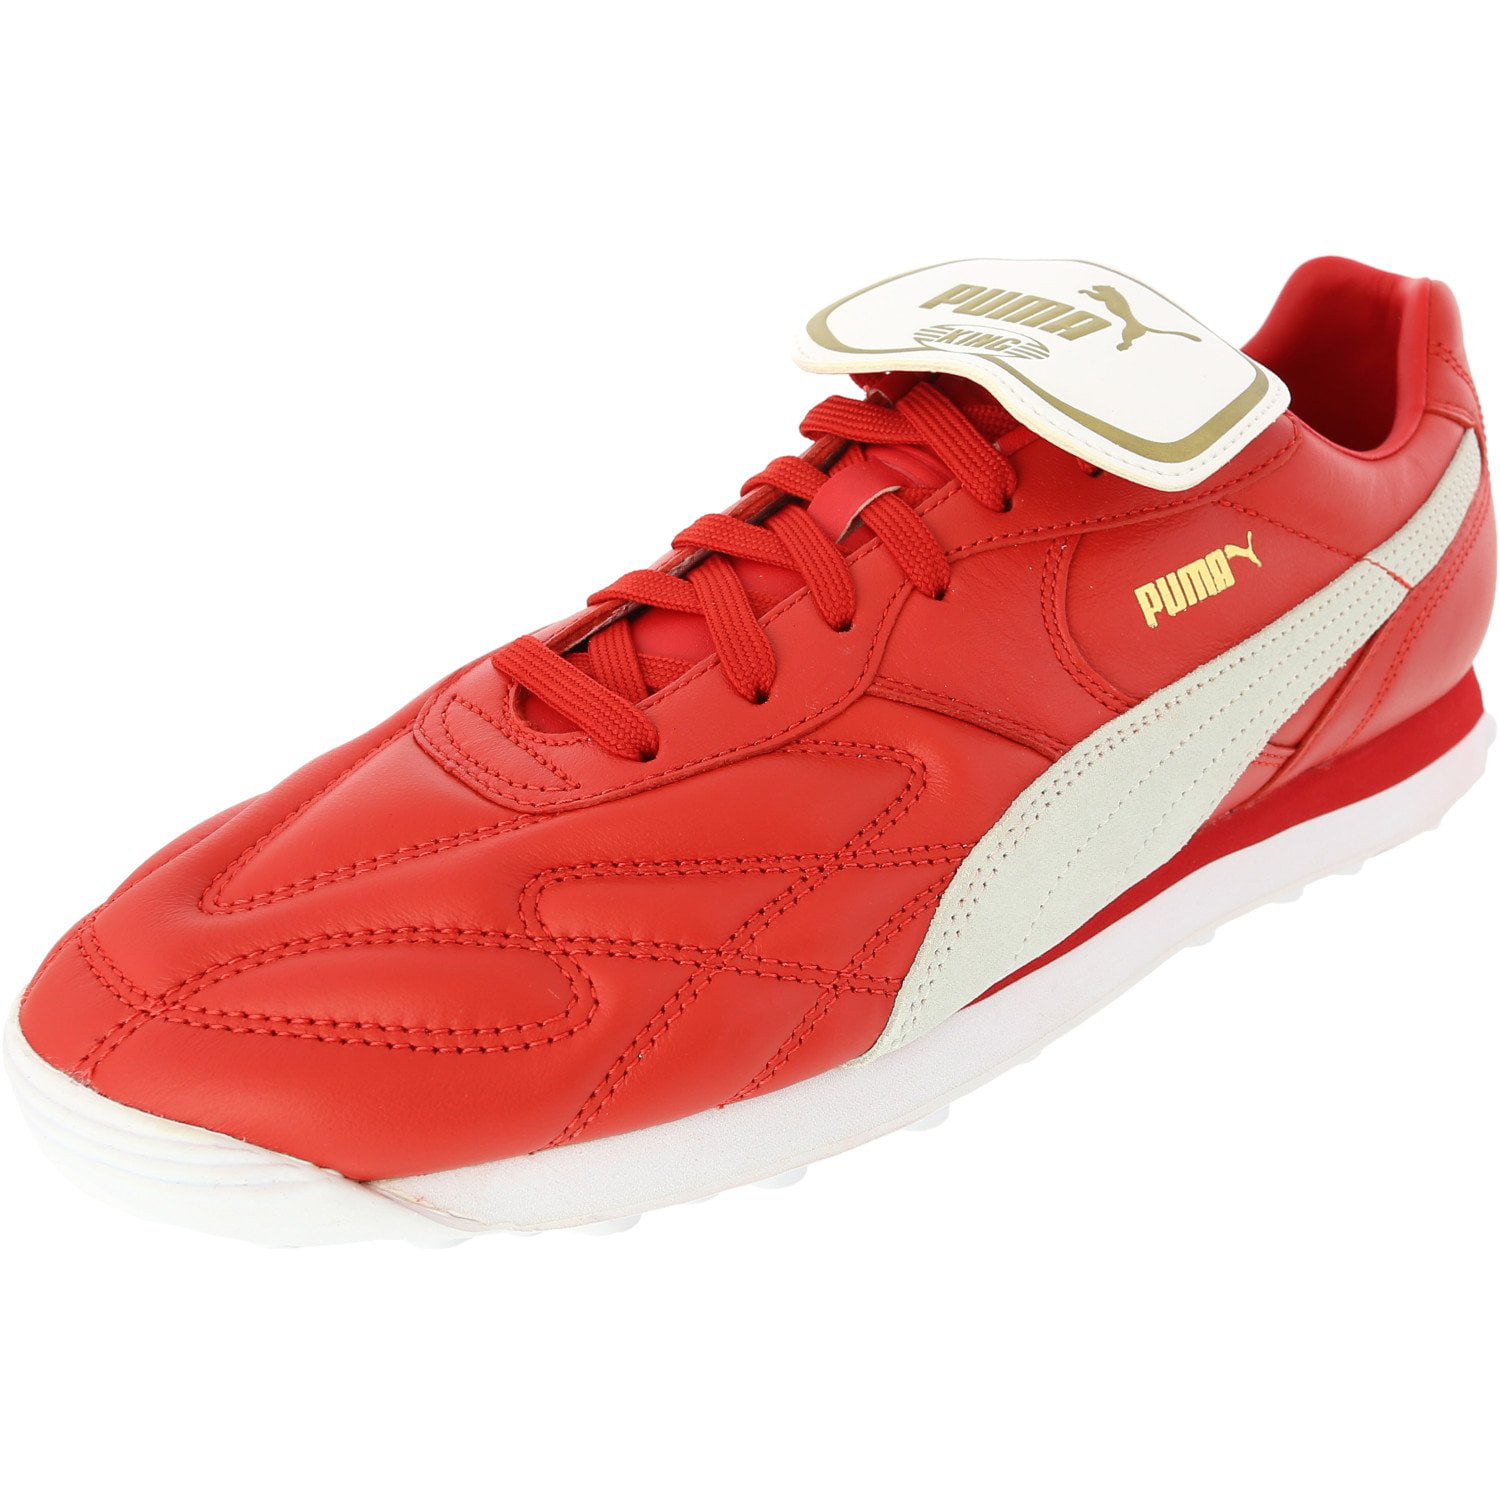 red puma shoes outfit